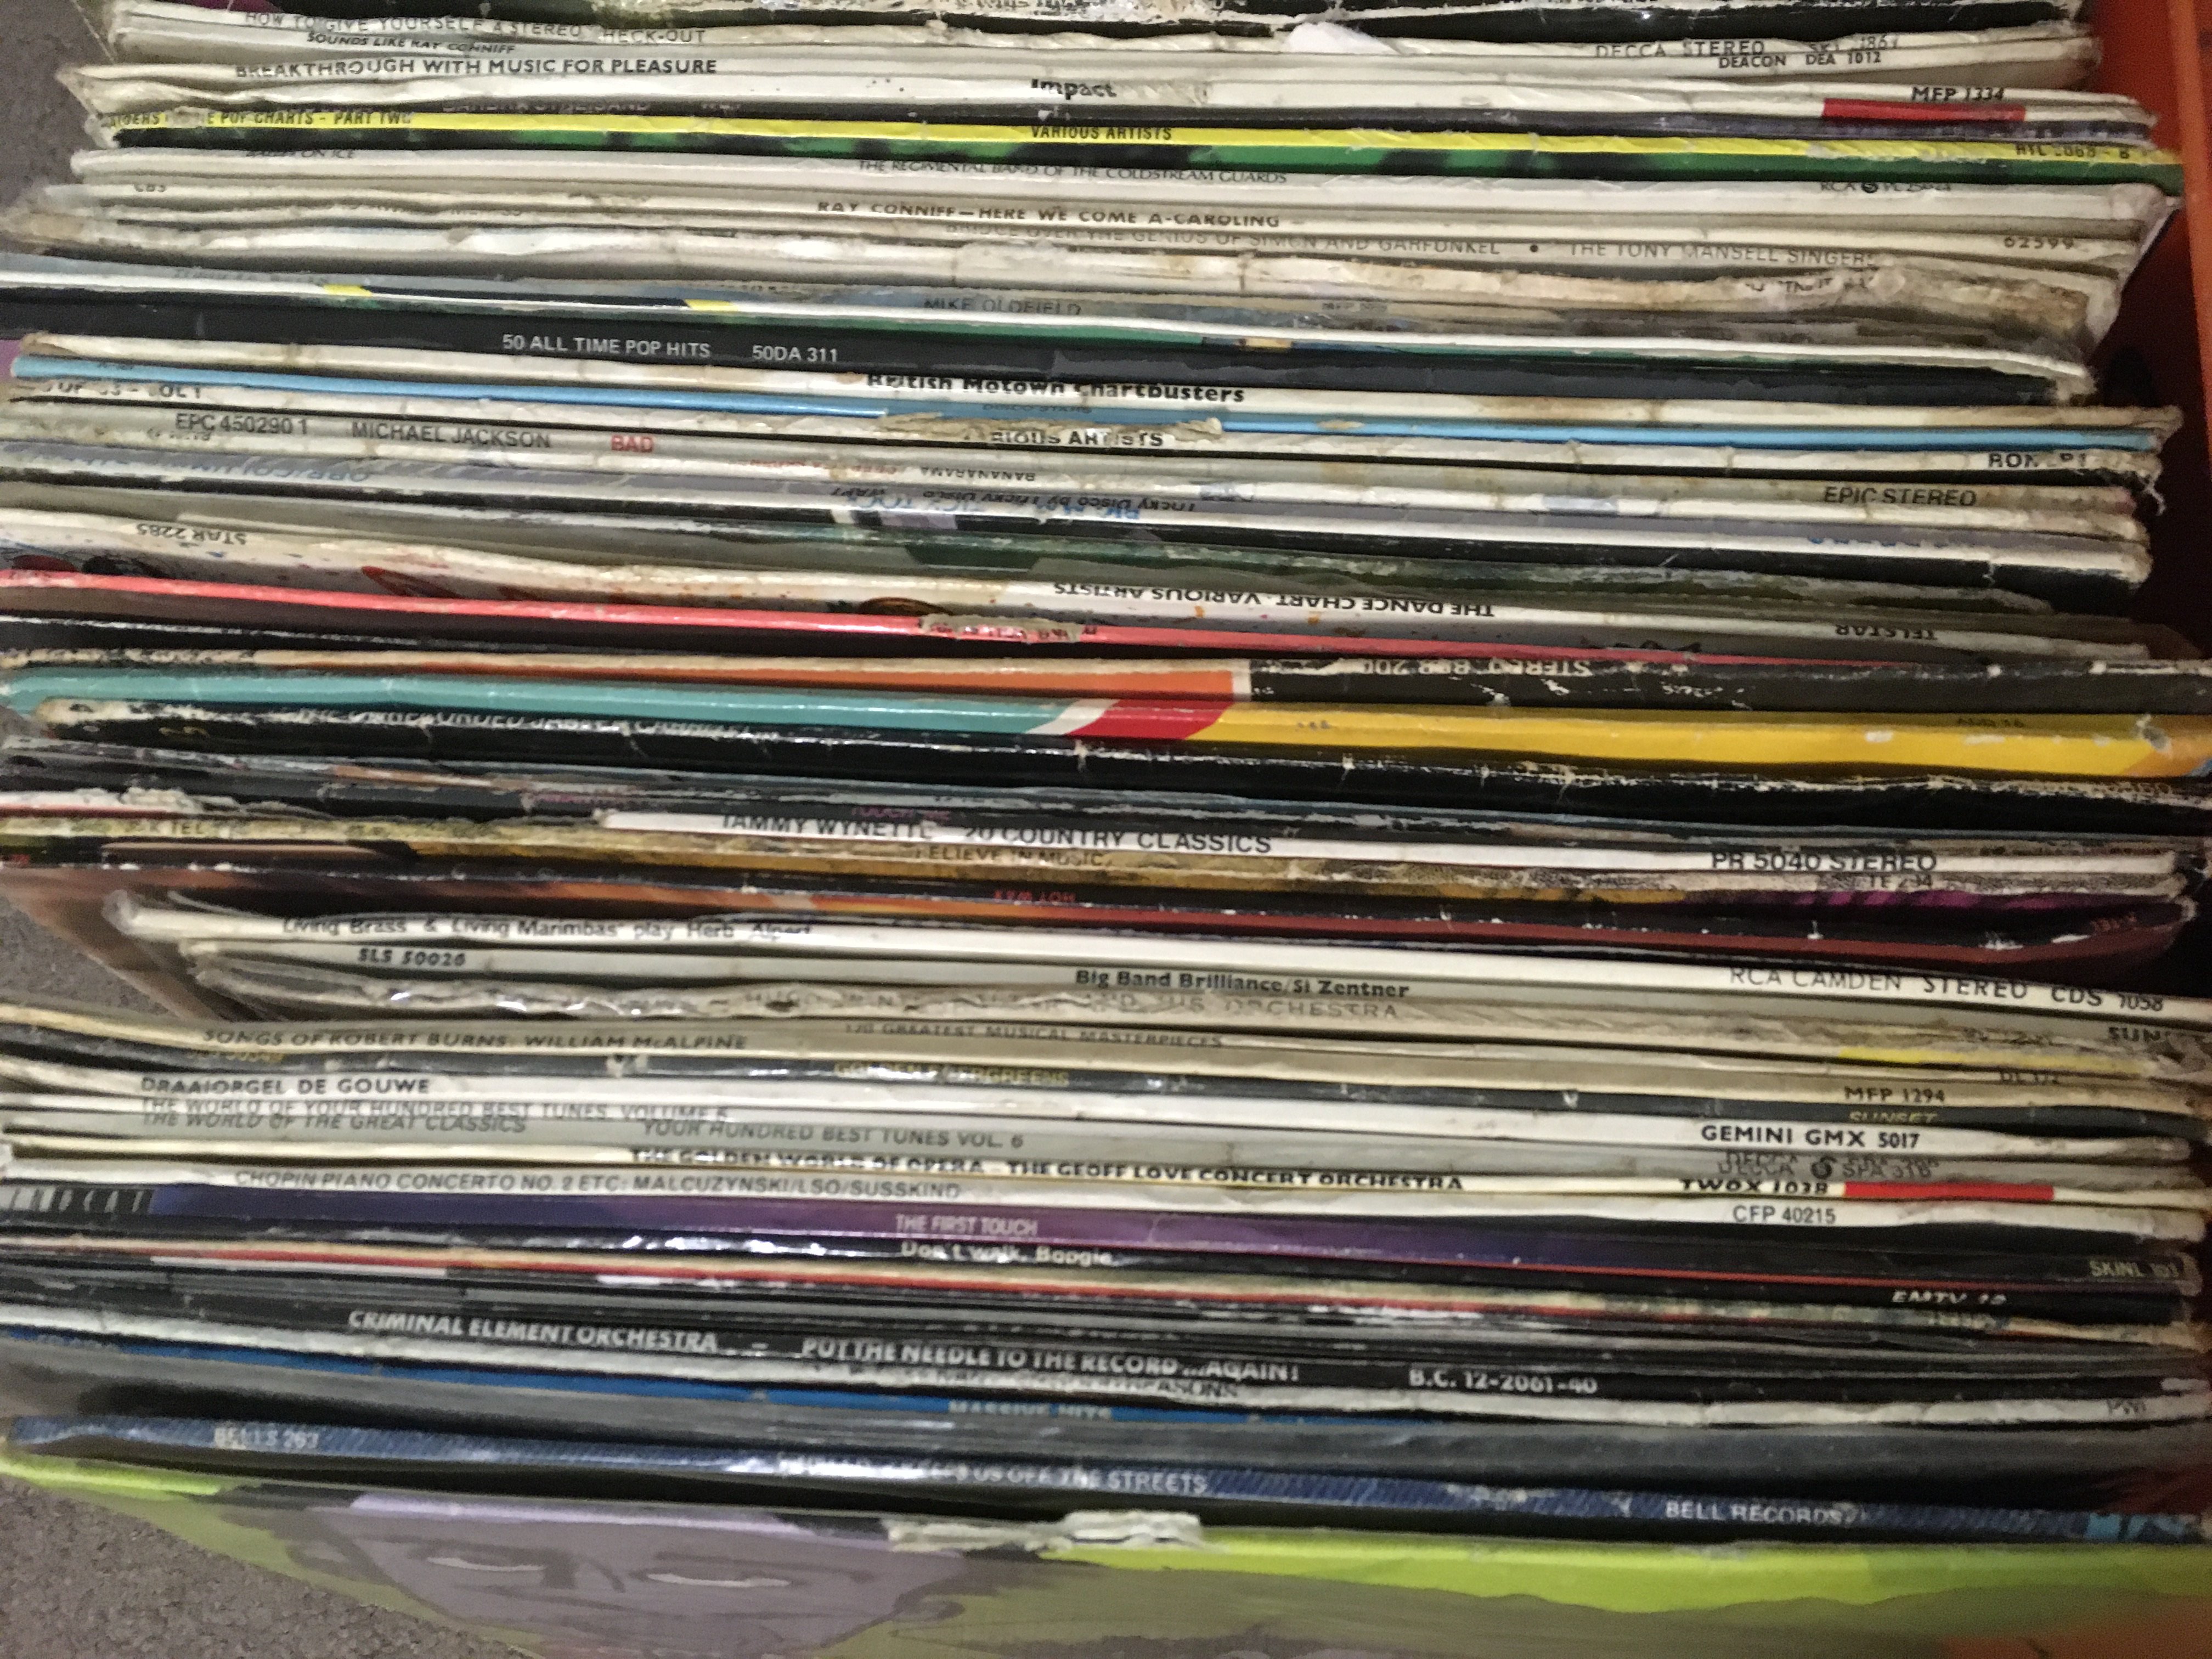 A box of LPs and 12 inch singles by various artist - Image 2 of 5